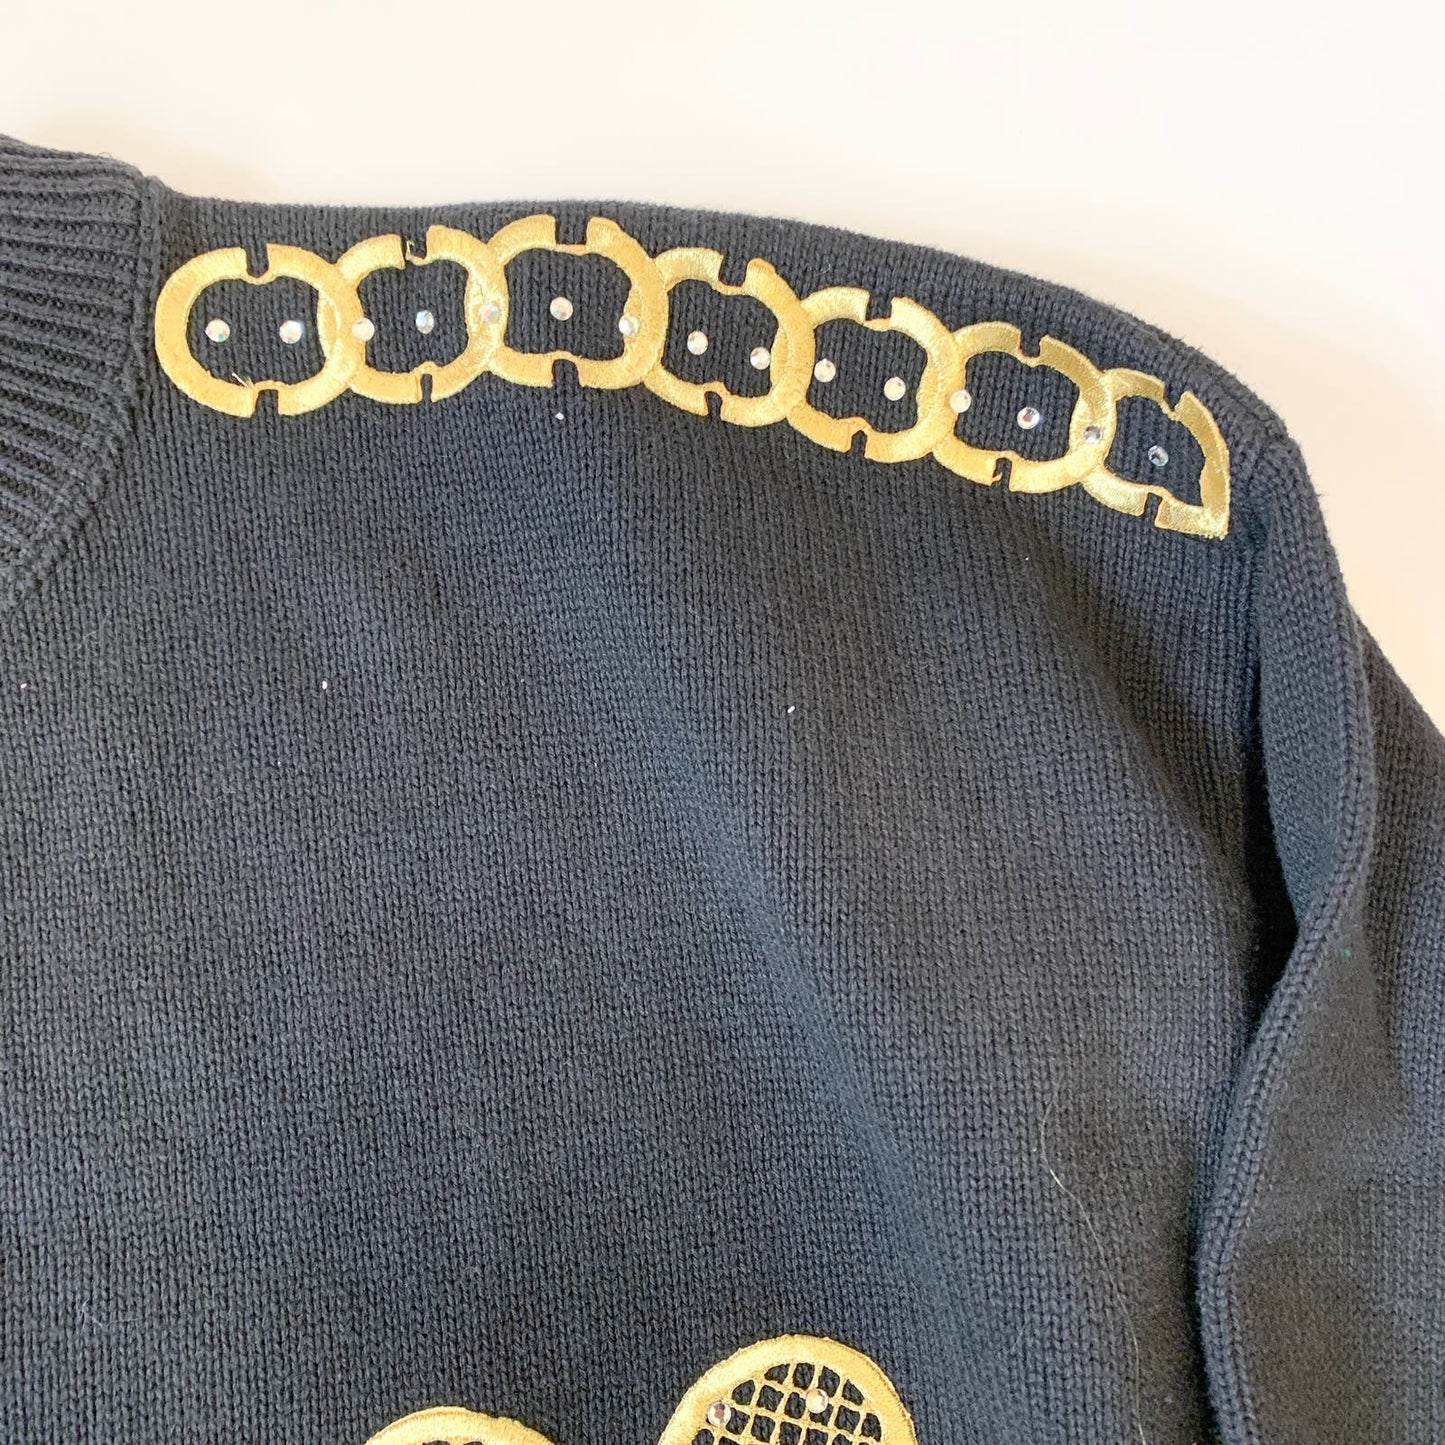 Vintage 1990s Mardel Big City Knits Tennis Cotton Quirky Sweater Black Gold 2x